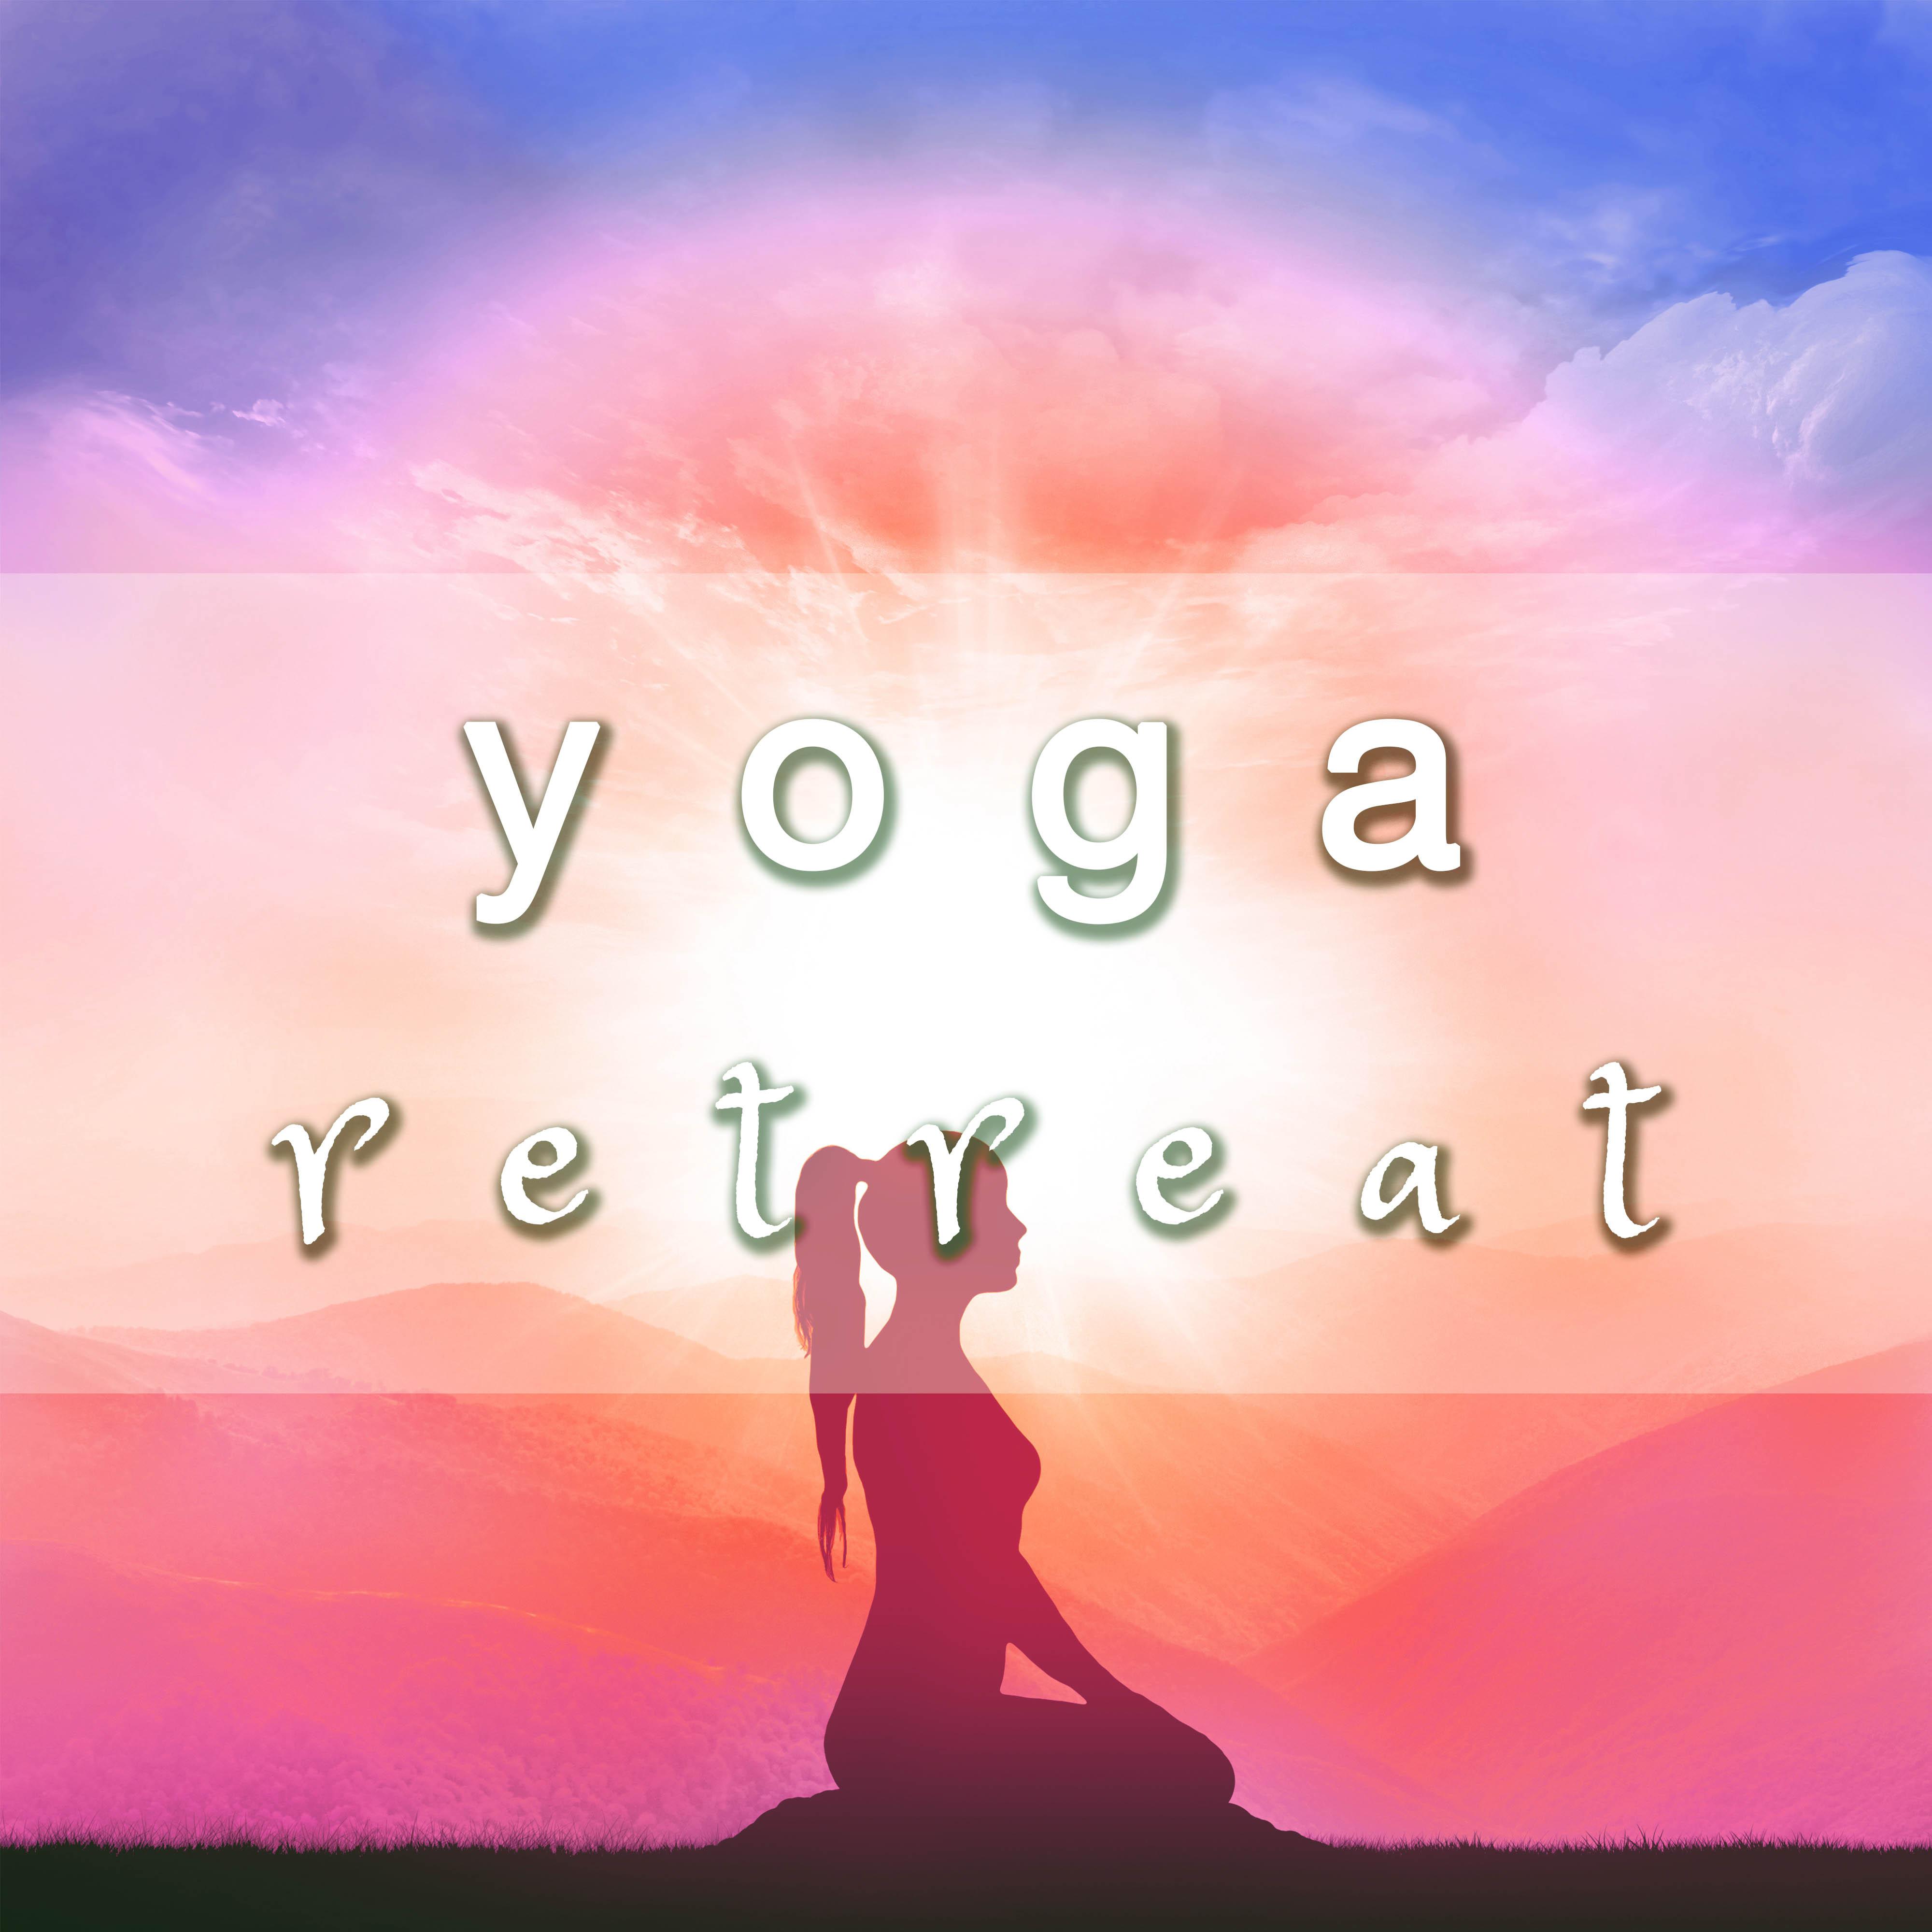 Yoga Retreat - Helpful Sounds to find Balance and Relaxation